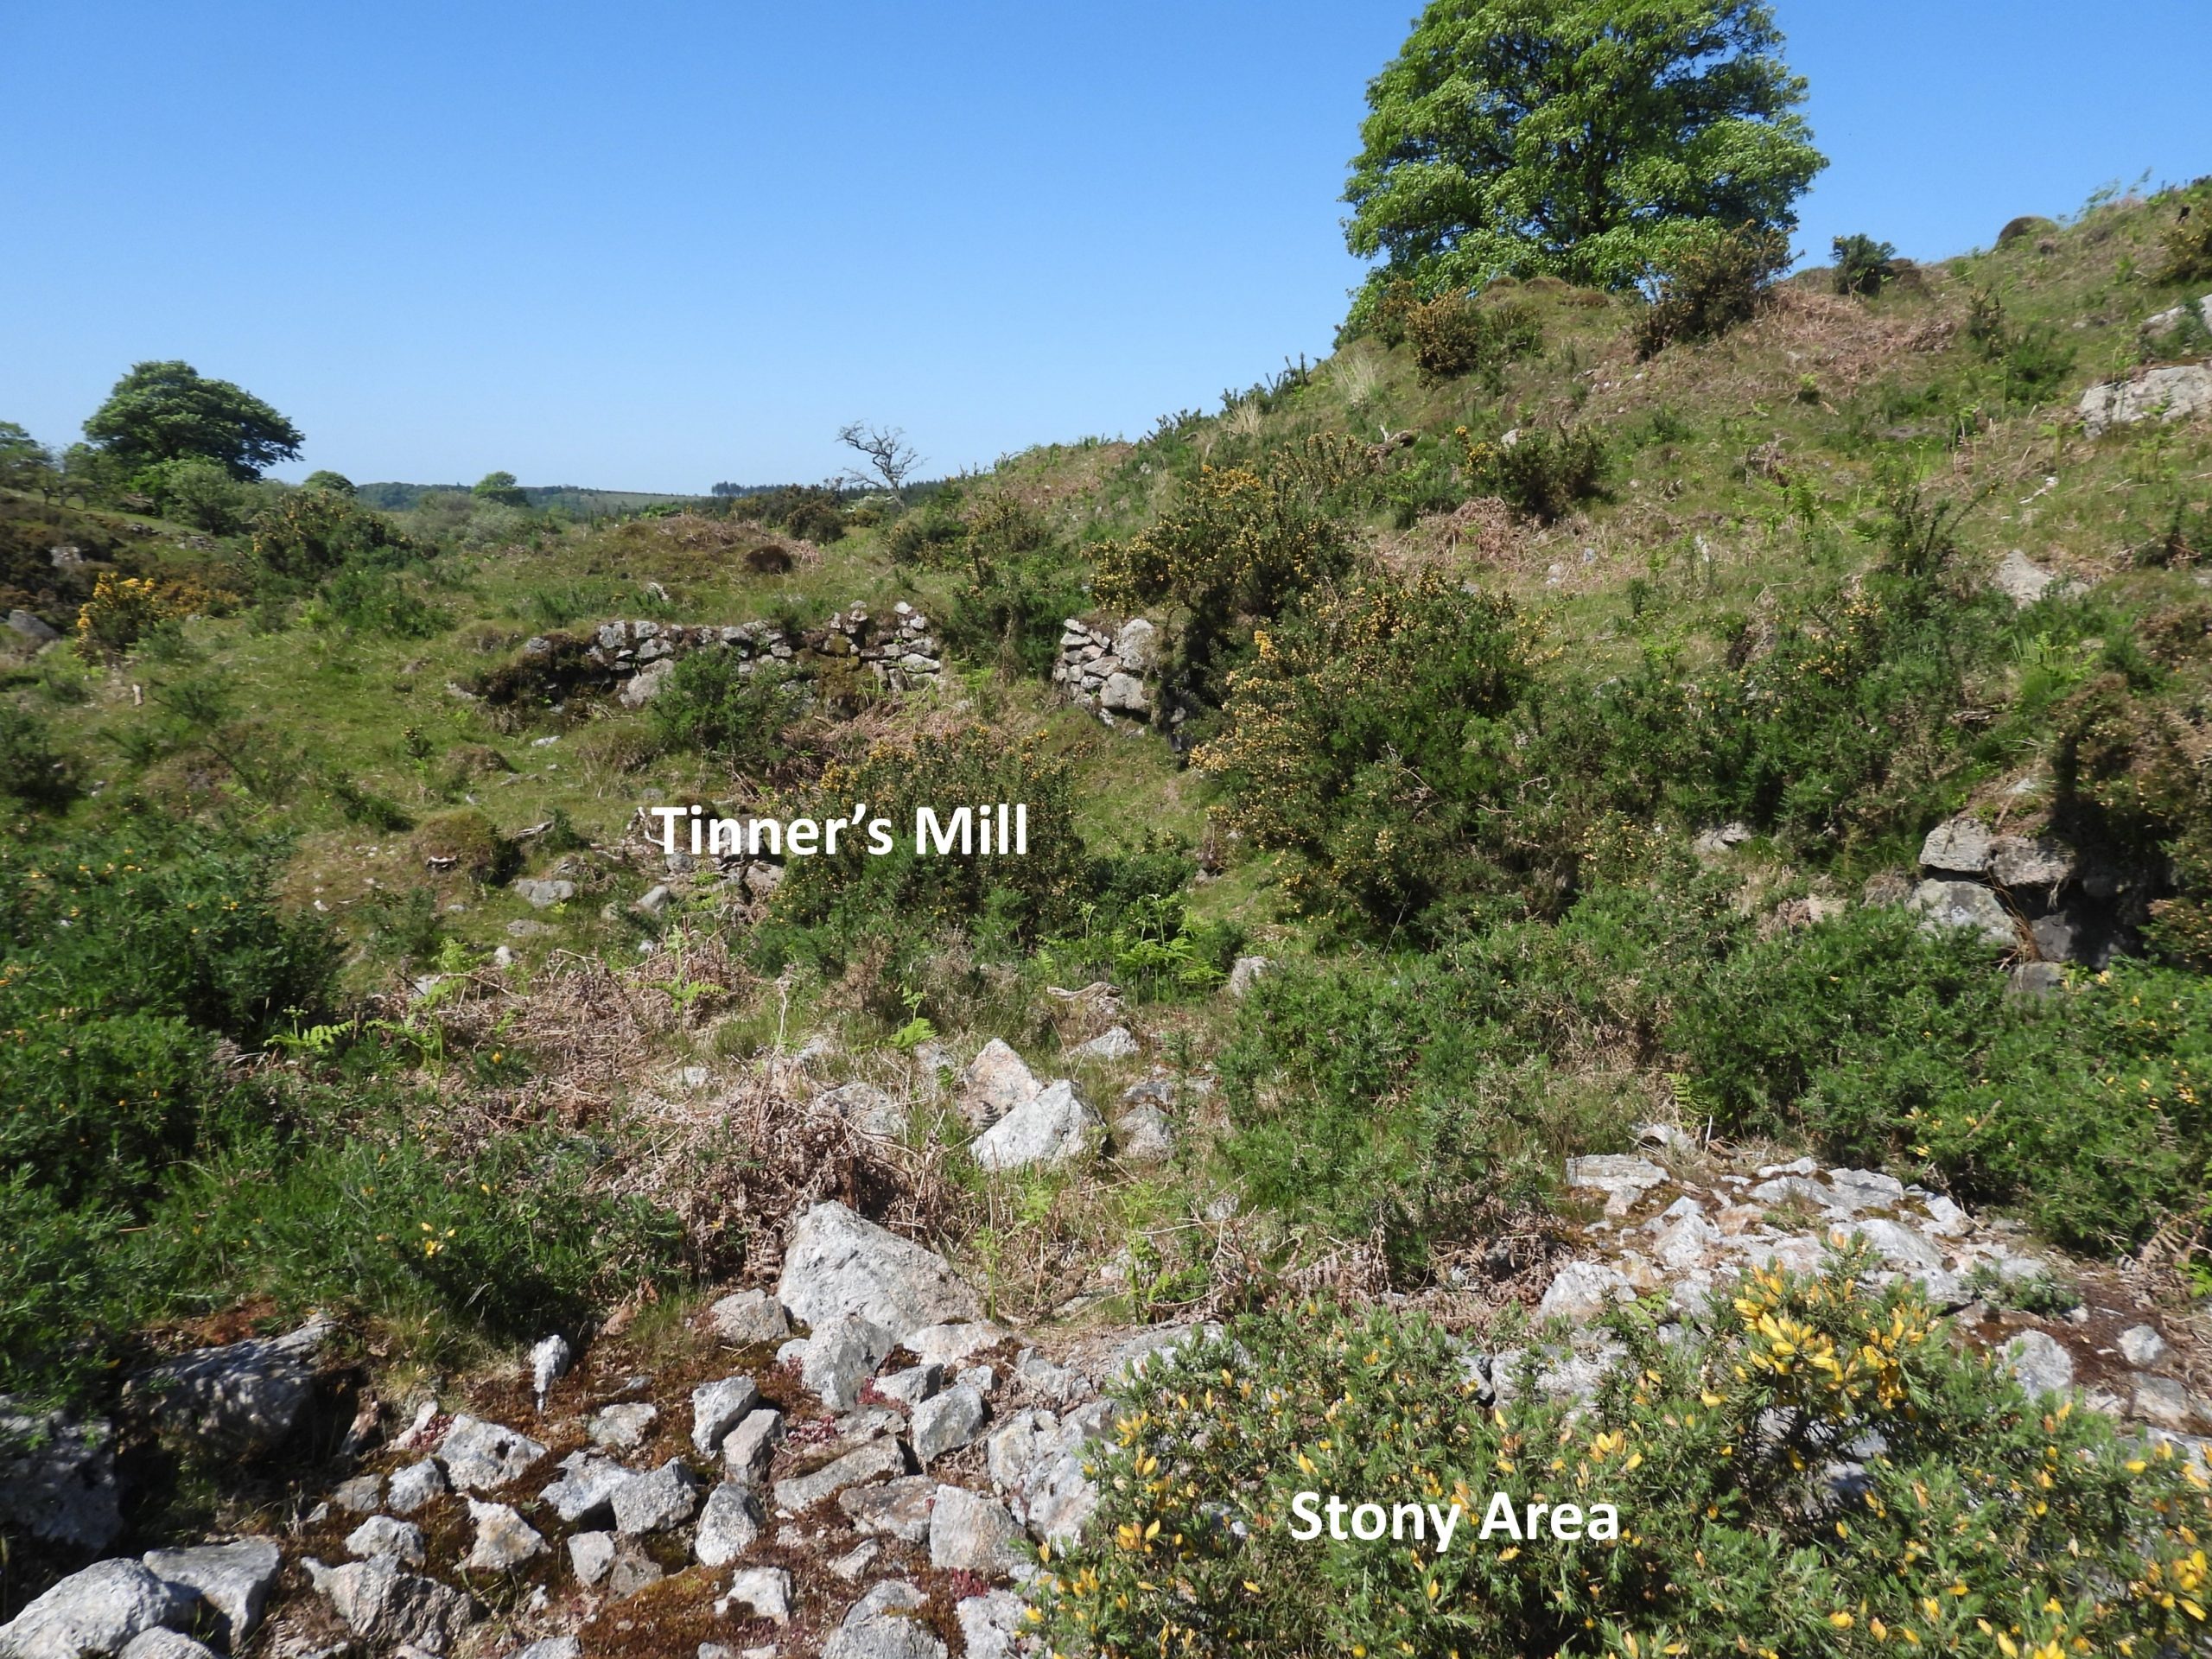 5. Tinners Mill a